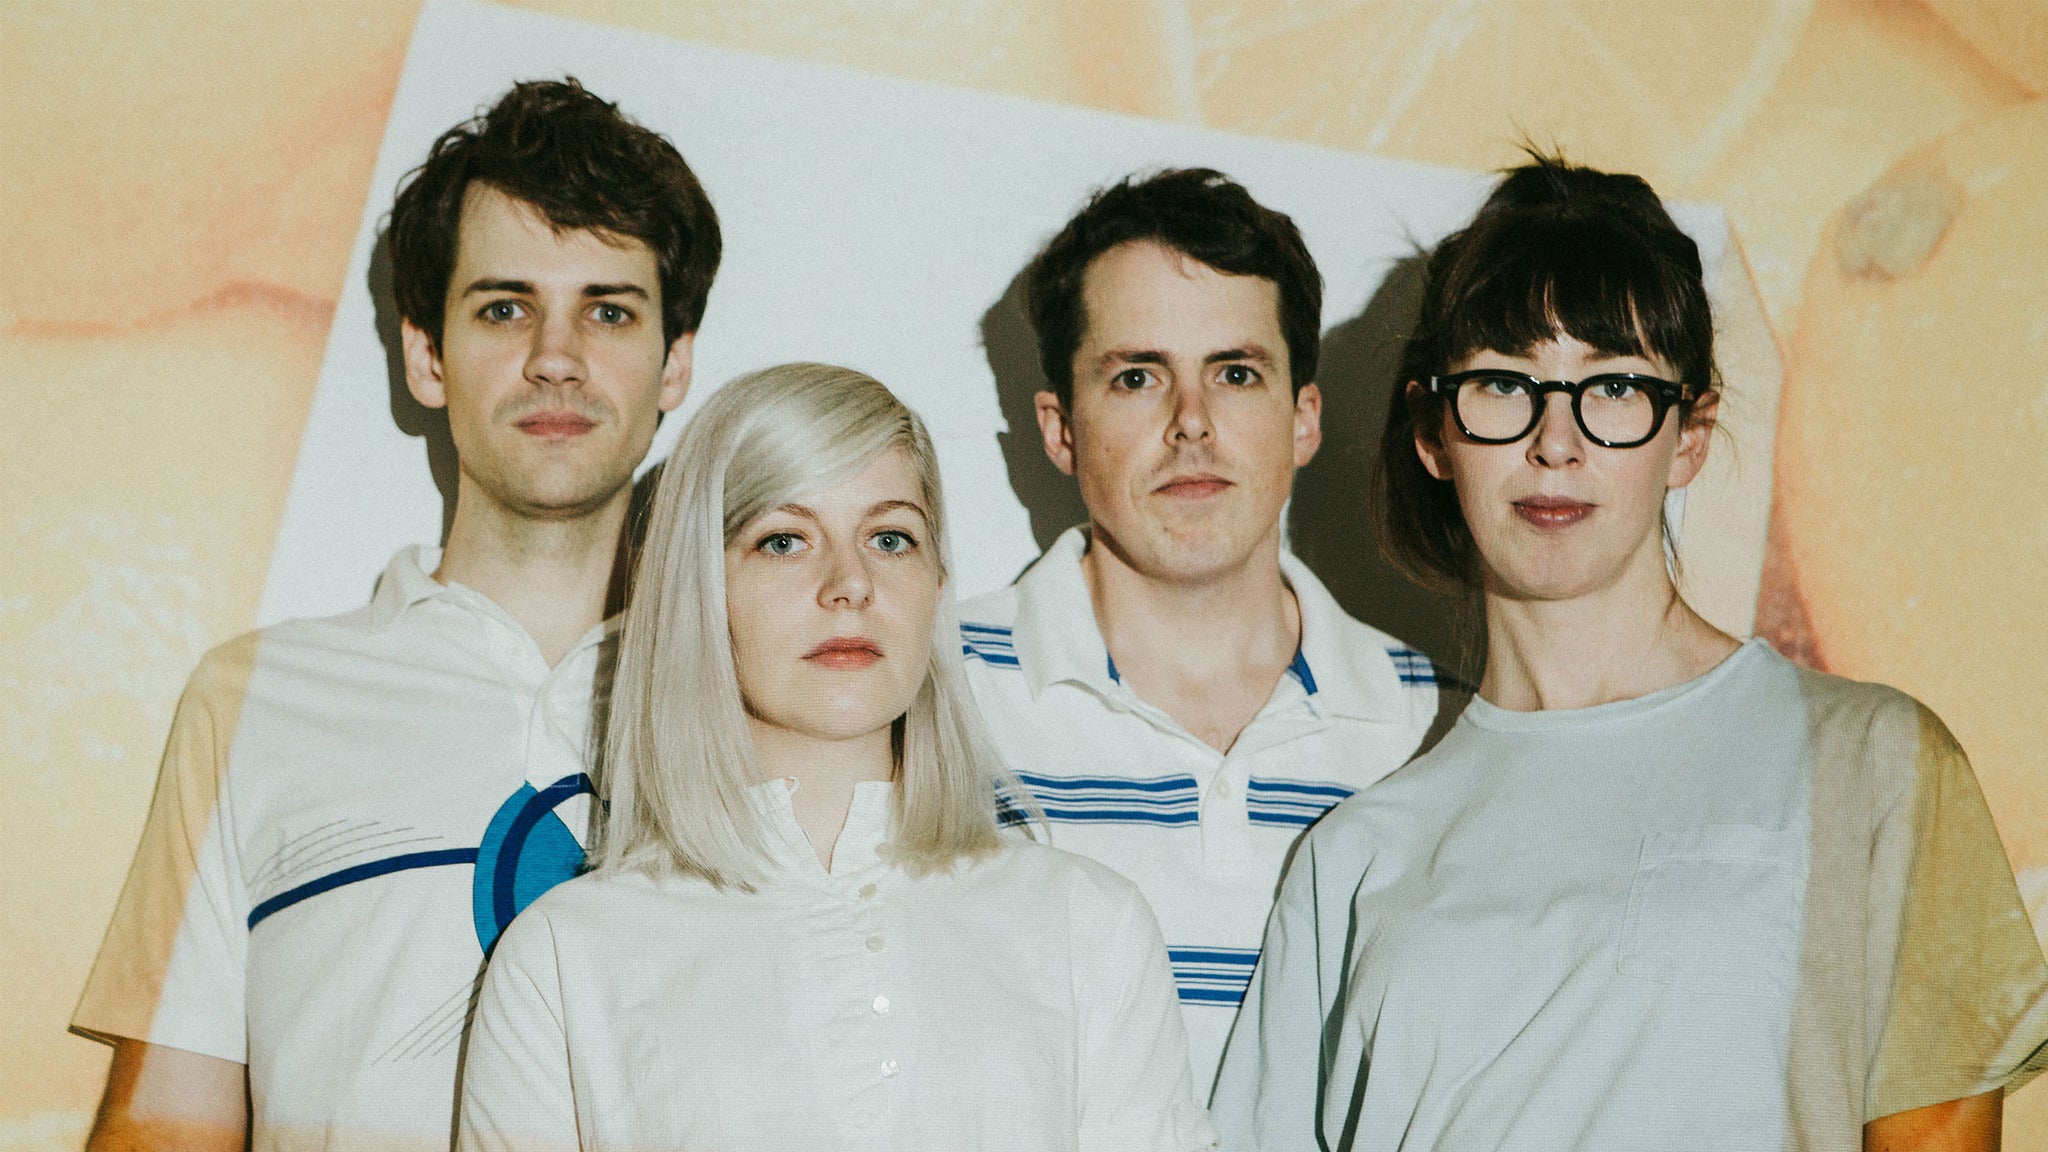 Image used with permission from Ticketmaster | Alvvays tickets